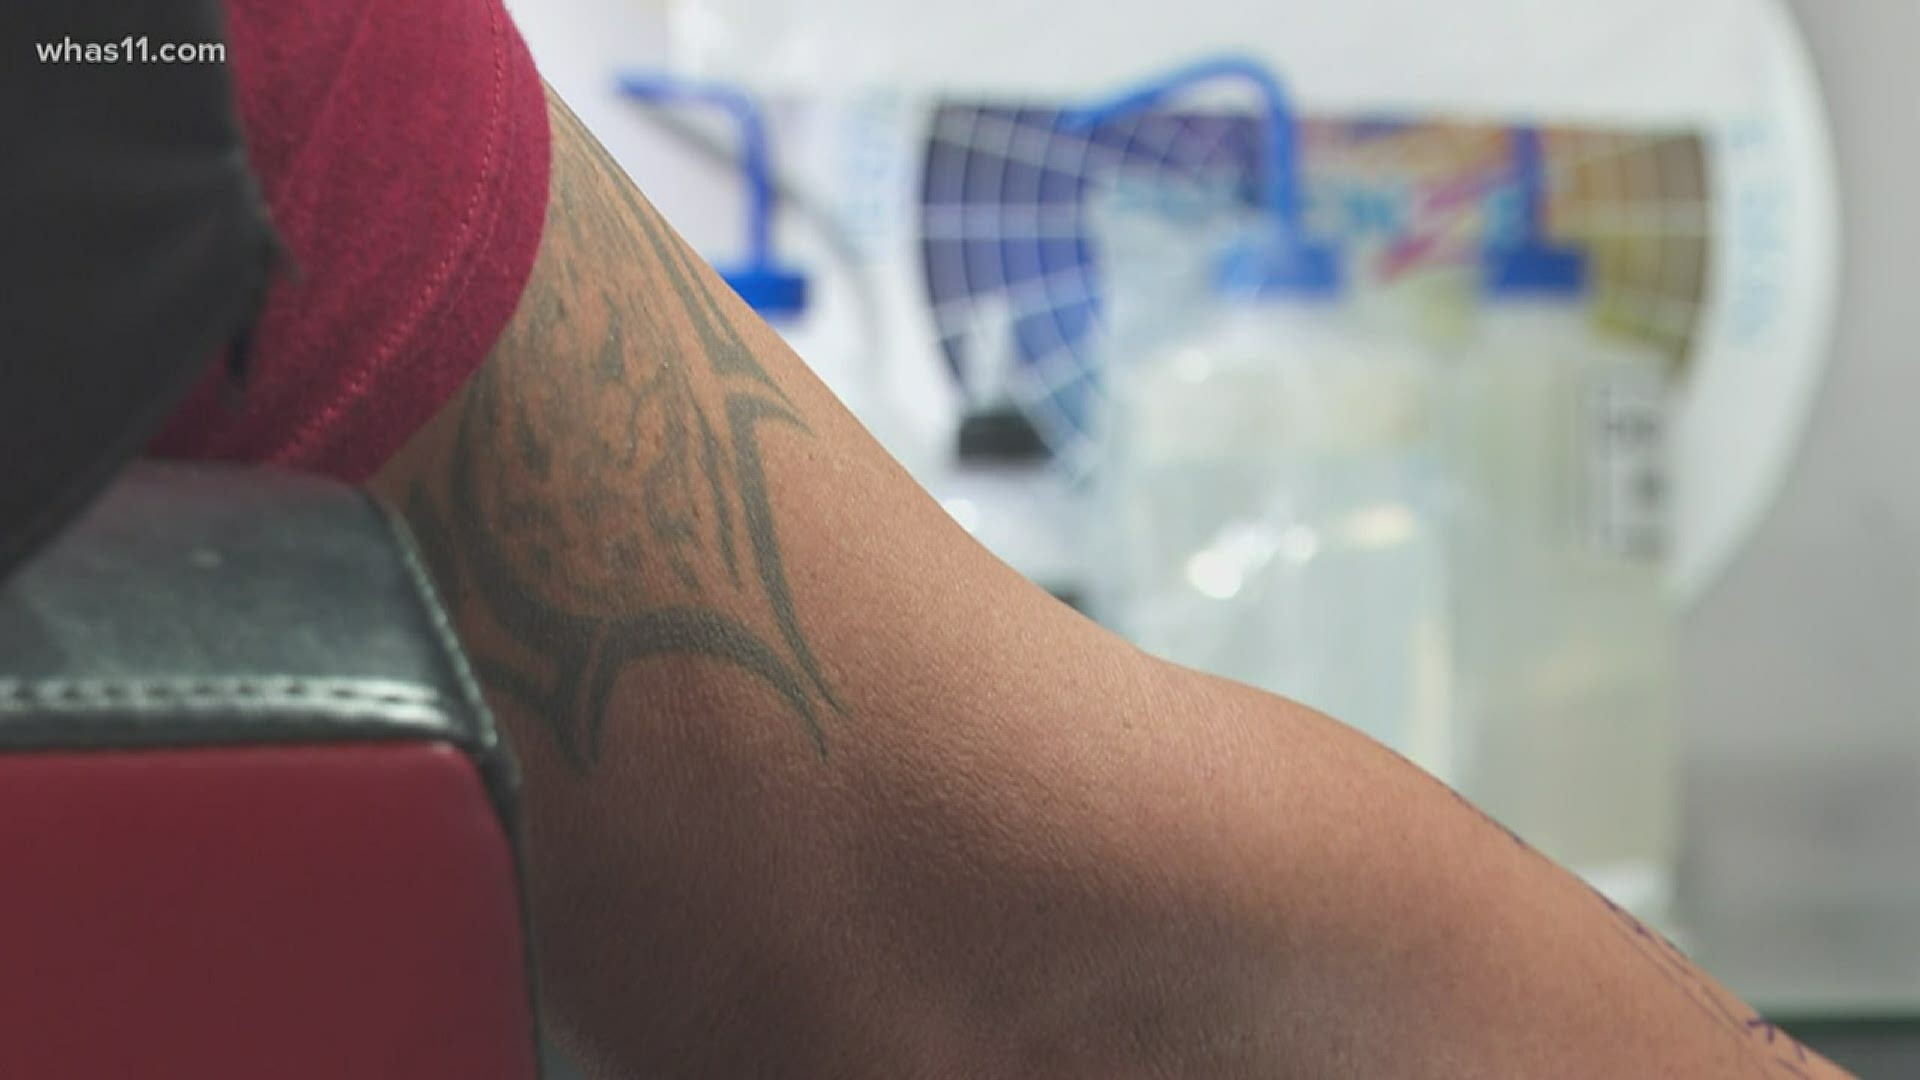 Tattoo artists across the Commonwealth are in crisis as COVID-19 impacts their industry. Local owners are showing how far they'll go to get back into business.